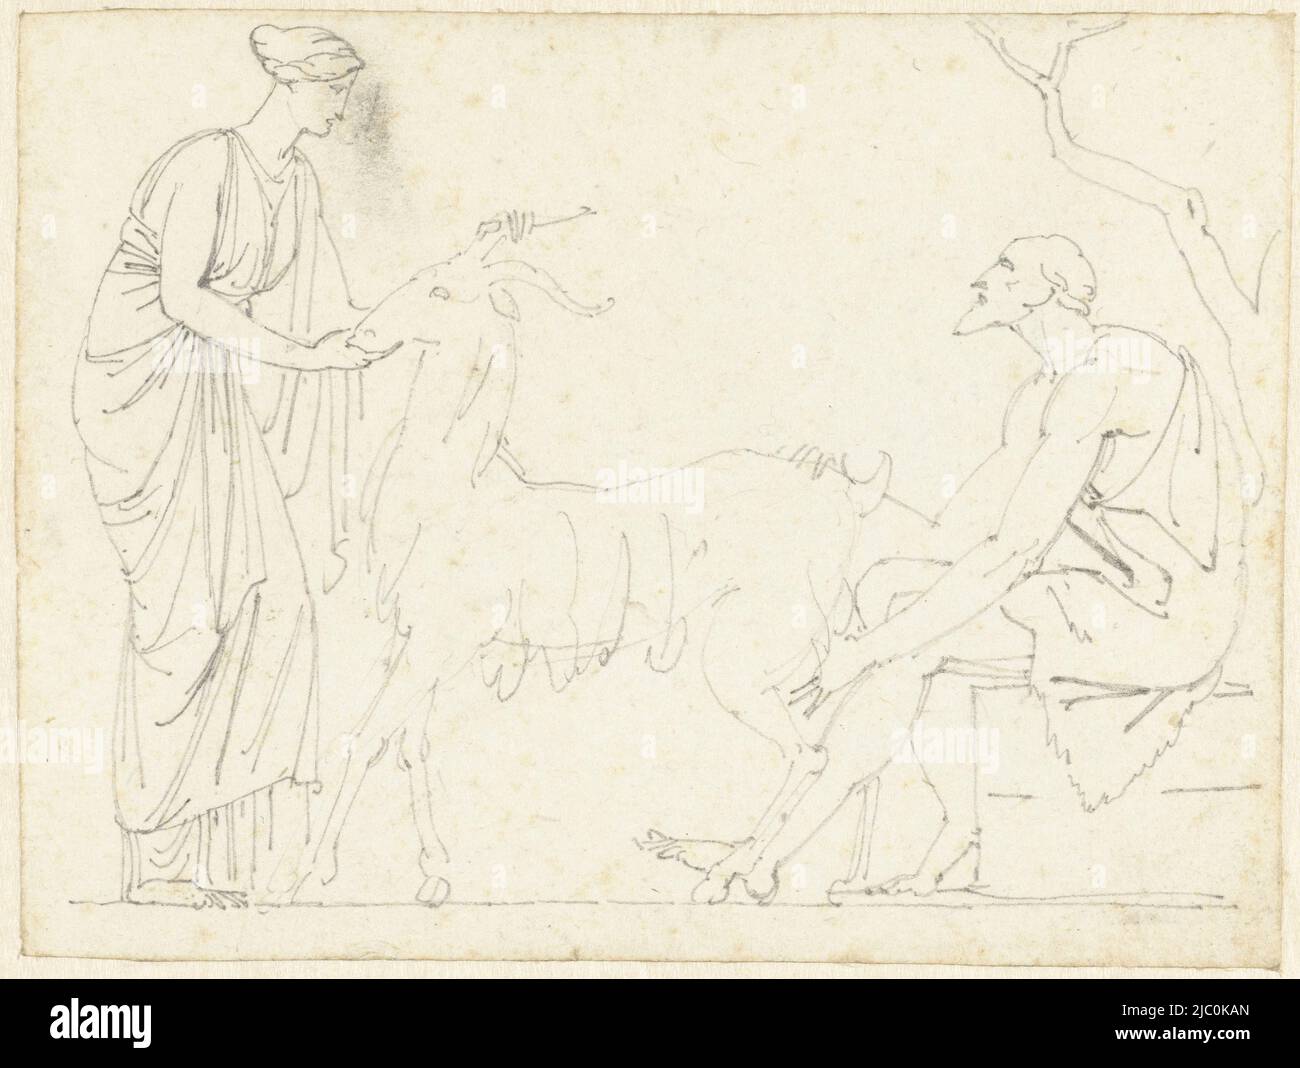 Standing woman and sitting man on either side of a goat, draughtsman: David Pièrre Giottino Humbert de Superville, 1780 - 1849, paper, h 104 mm × w 137 mm Stock Photo